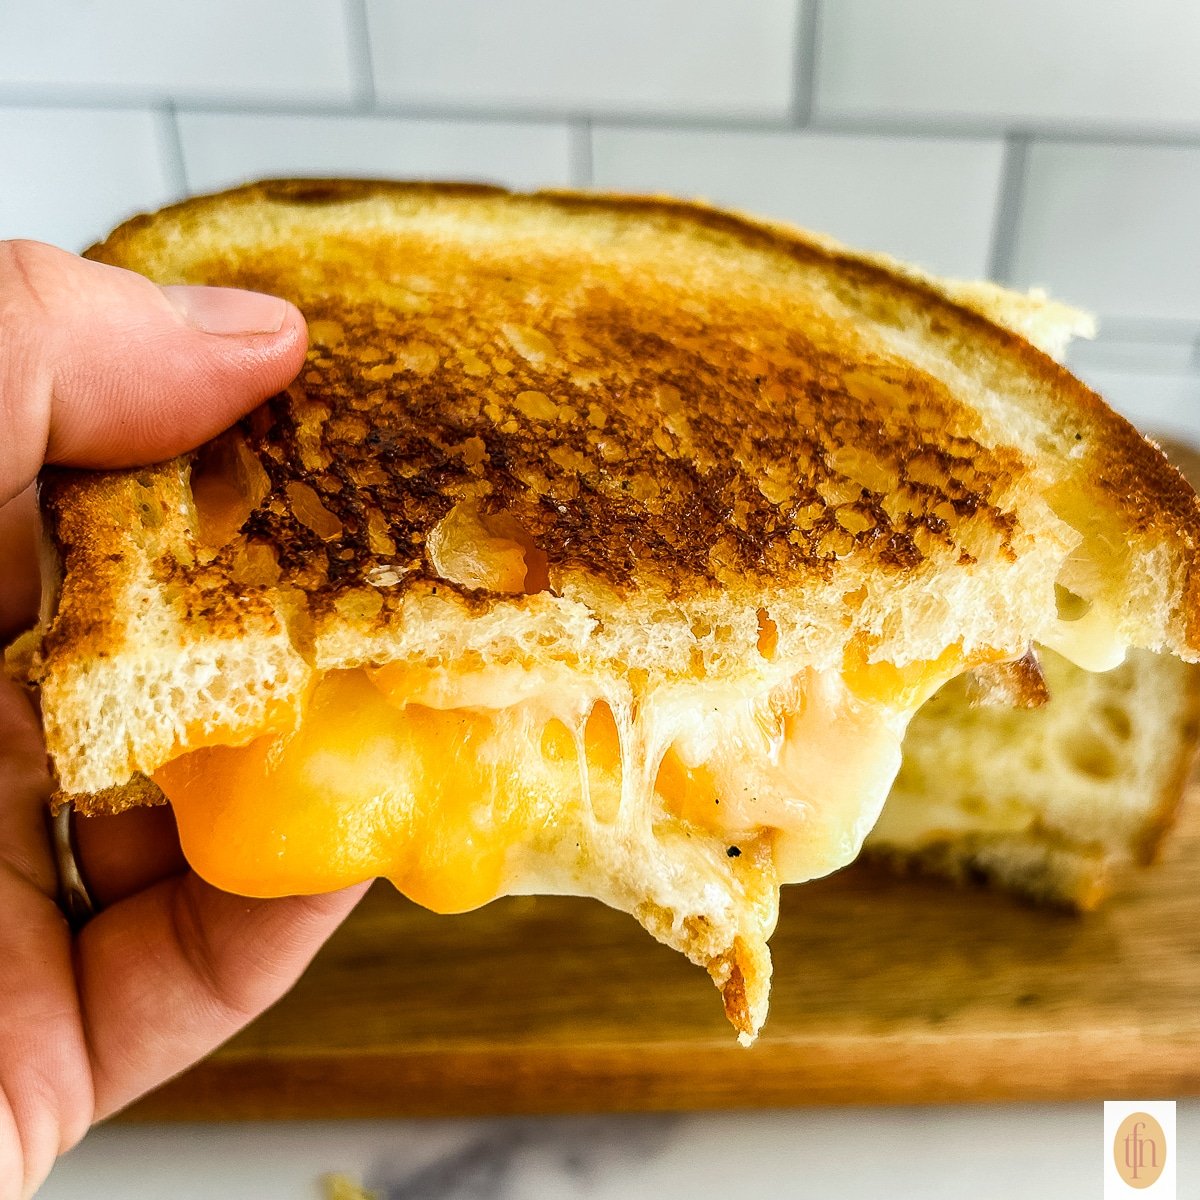 Woman's hand holding half of a grilled cheese sandwich.